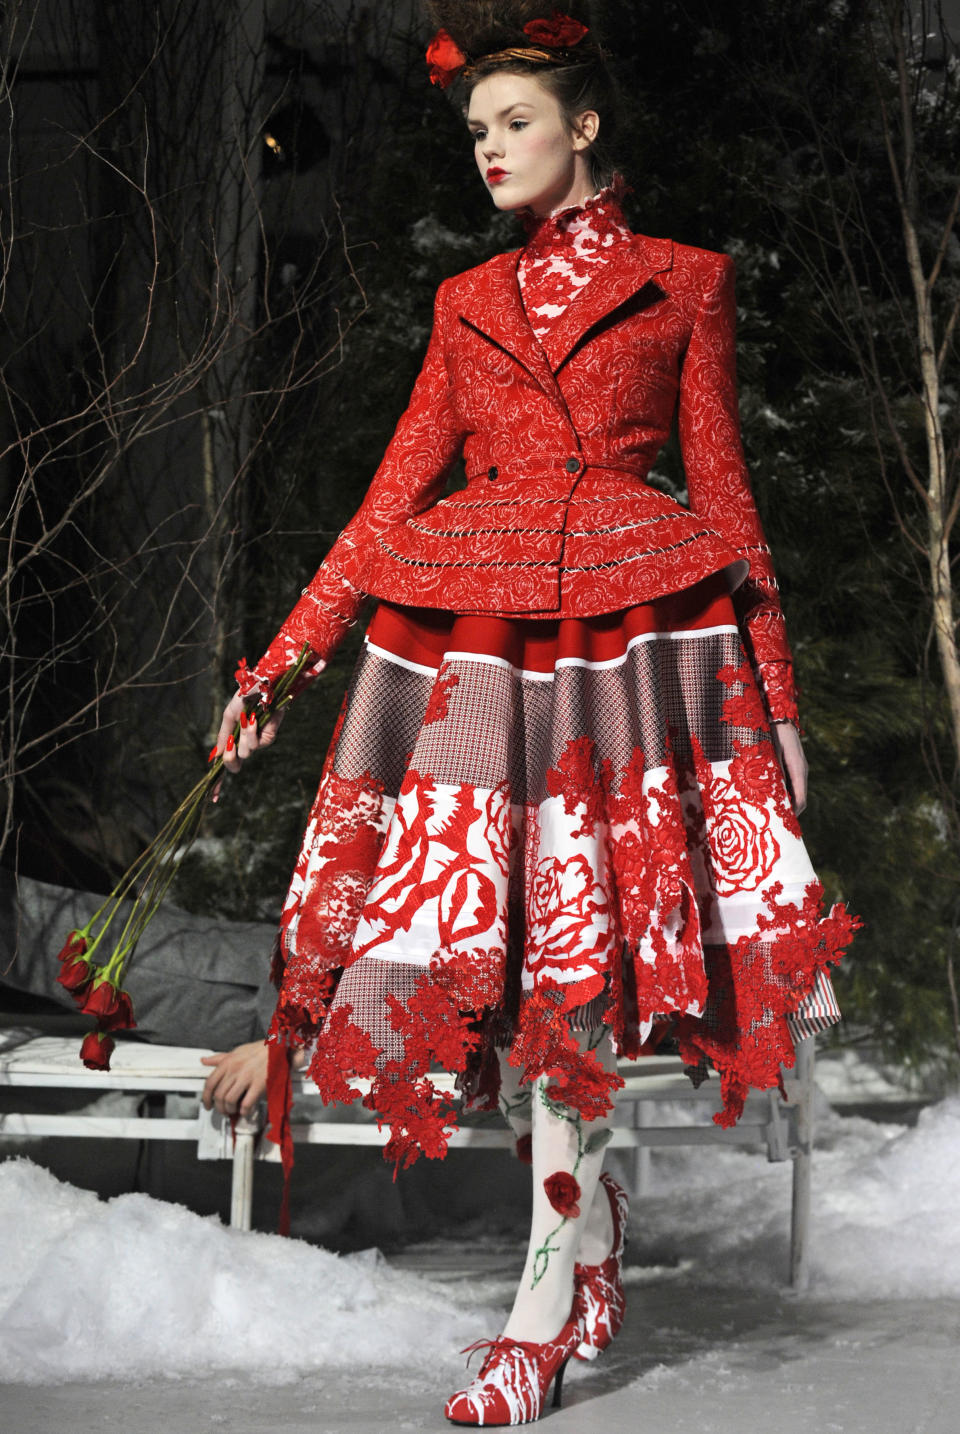 The Thom Browne Fall 2013 collection is modeled during Fashion Week, Monday, Feb. 11, 2013, in New York. (AP Photo/Louis Lanzano)